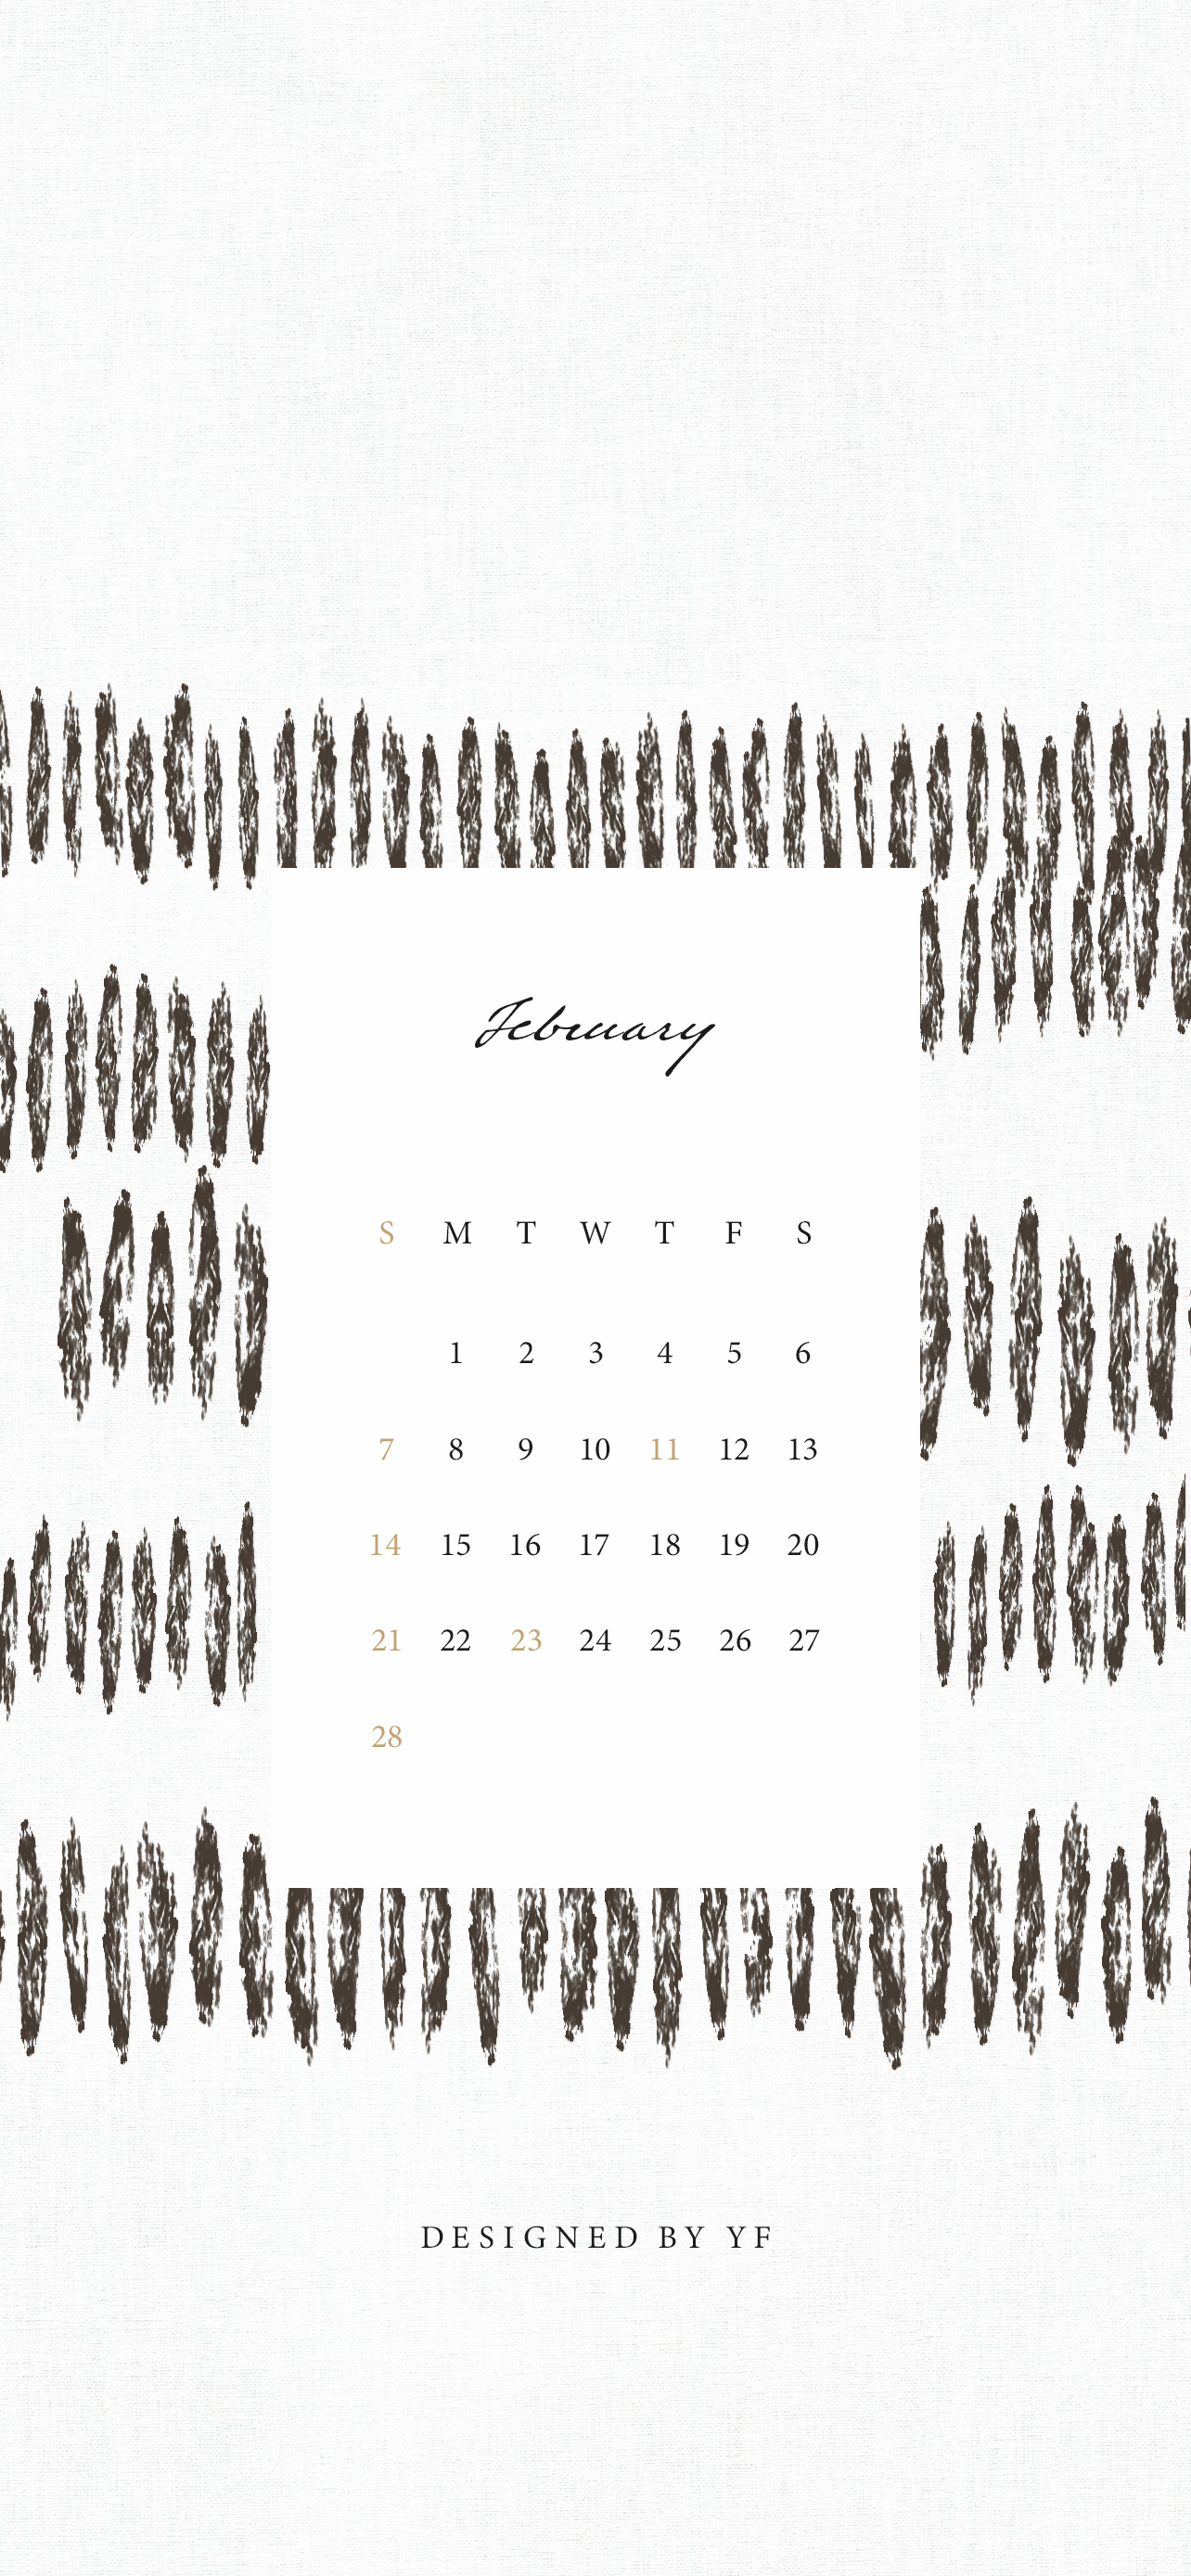 February 21 Calendar Wallpaper For The Iphone Designed By Yf